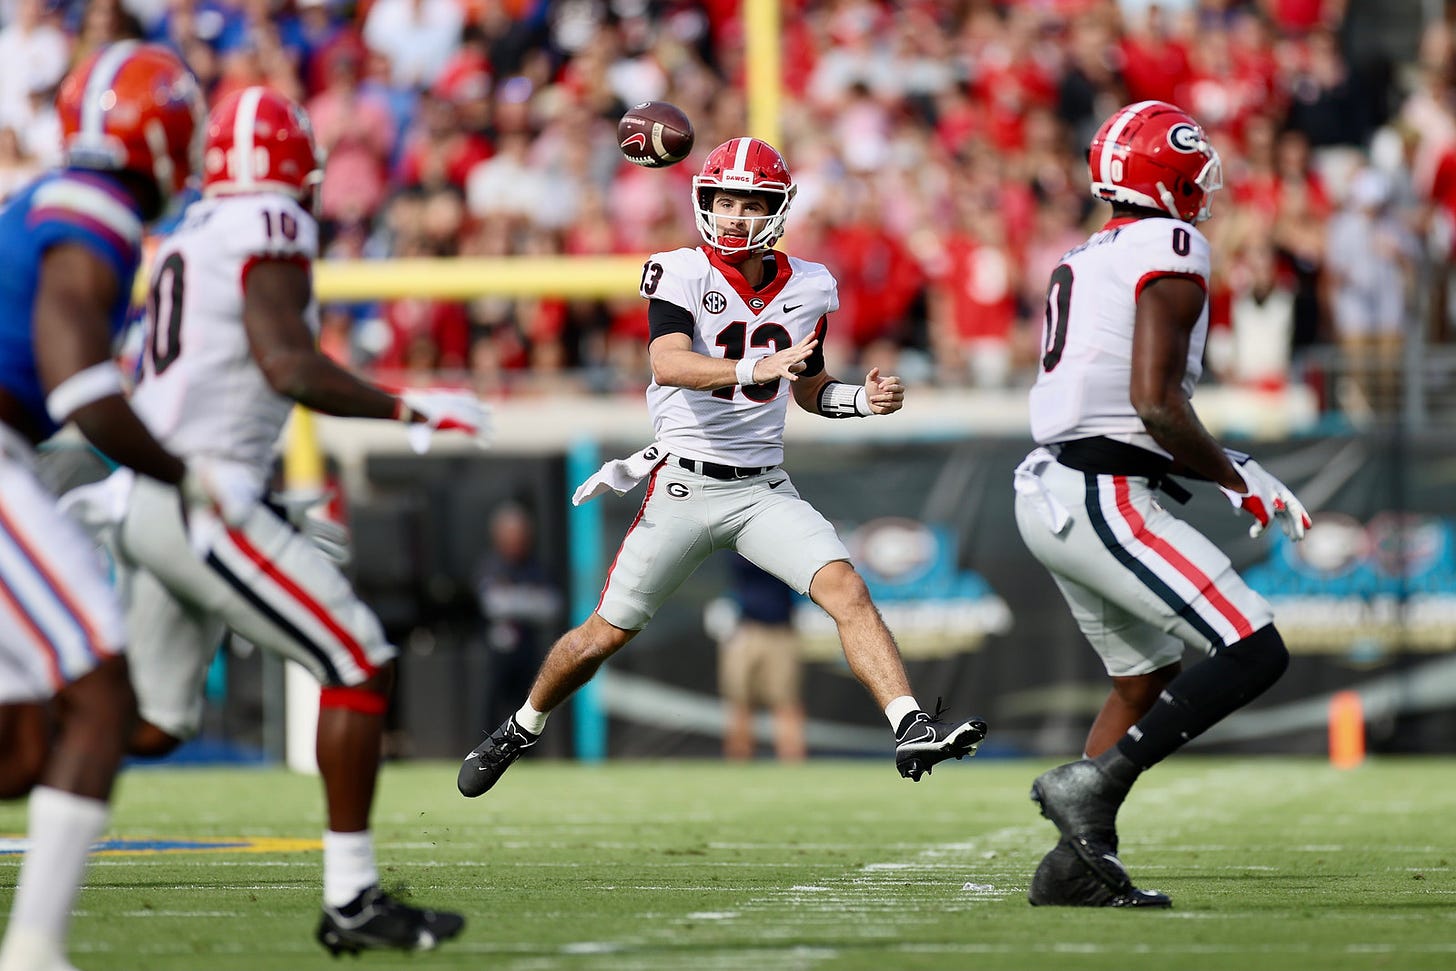 Georgia quarterback Stetson Bennett (13) during the Bulldogs’ game with Florida in Jacksonville, Fla., on Saturday, Oct. 30, 2021. (Photo by Mackenzie Miles)